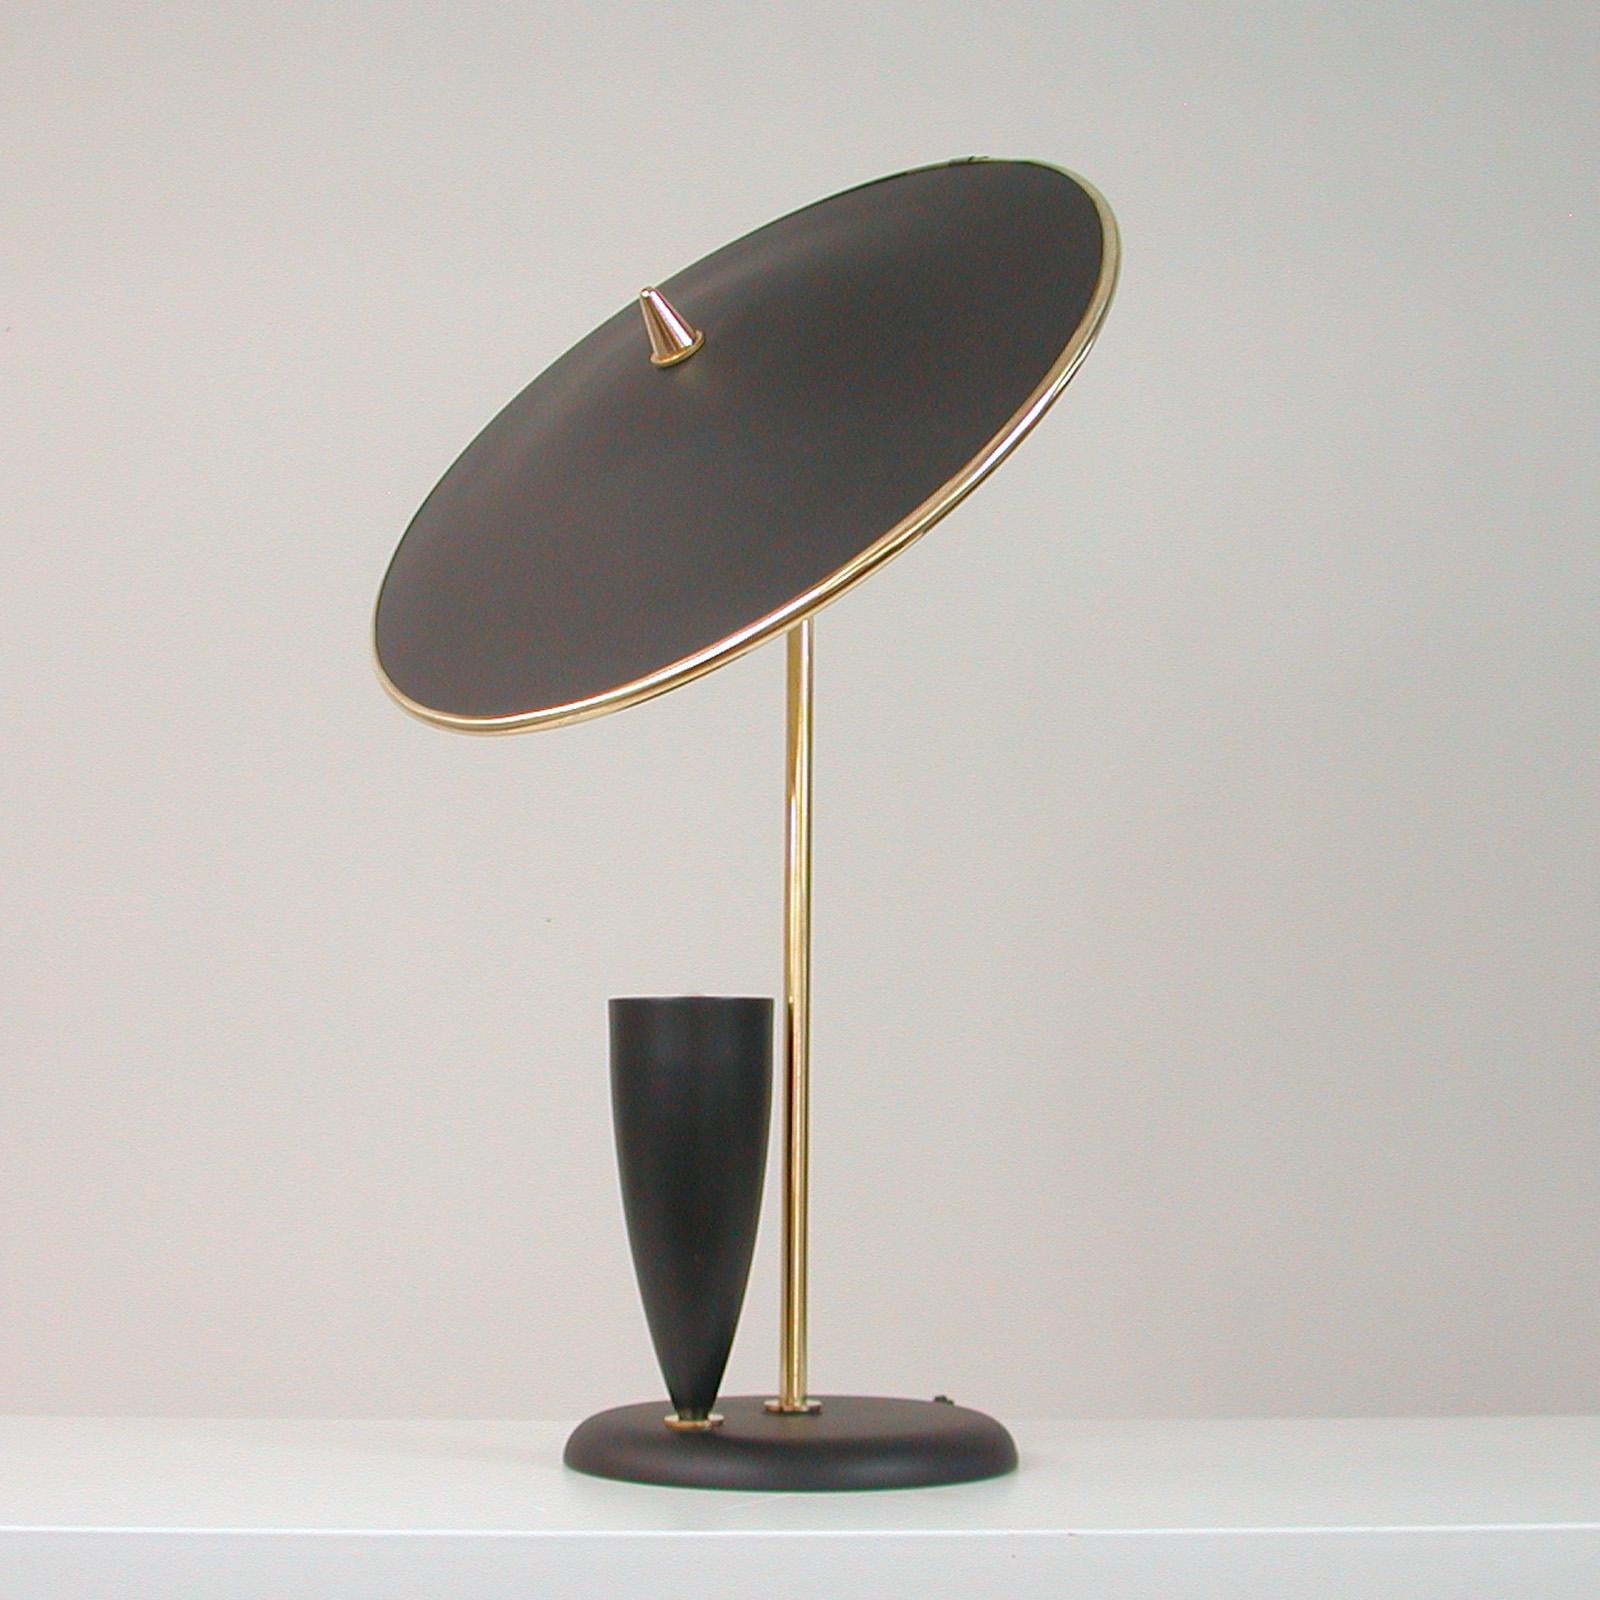 French Midcentury Reflecting Black and Brass Table Lamp, 1950s For Sale 6